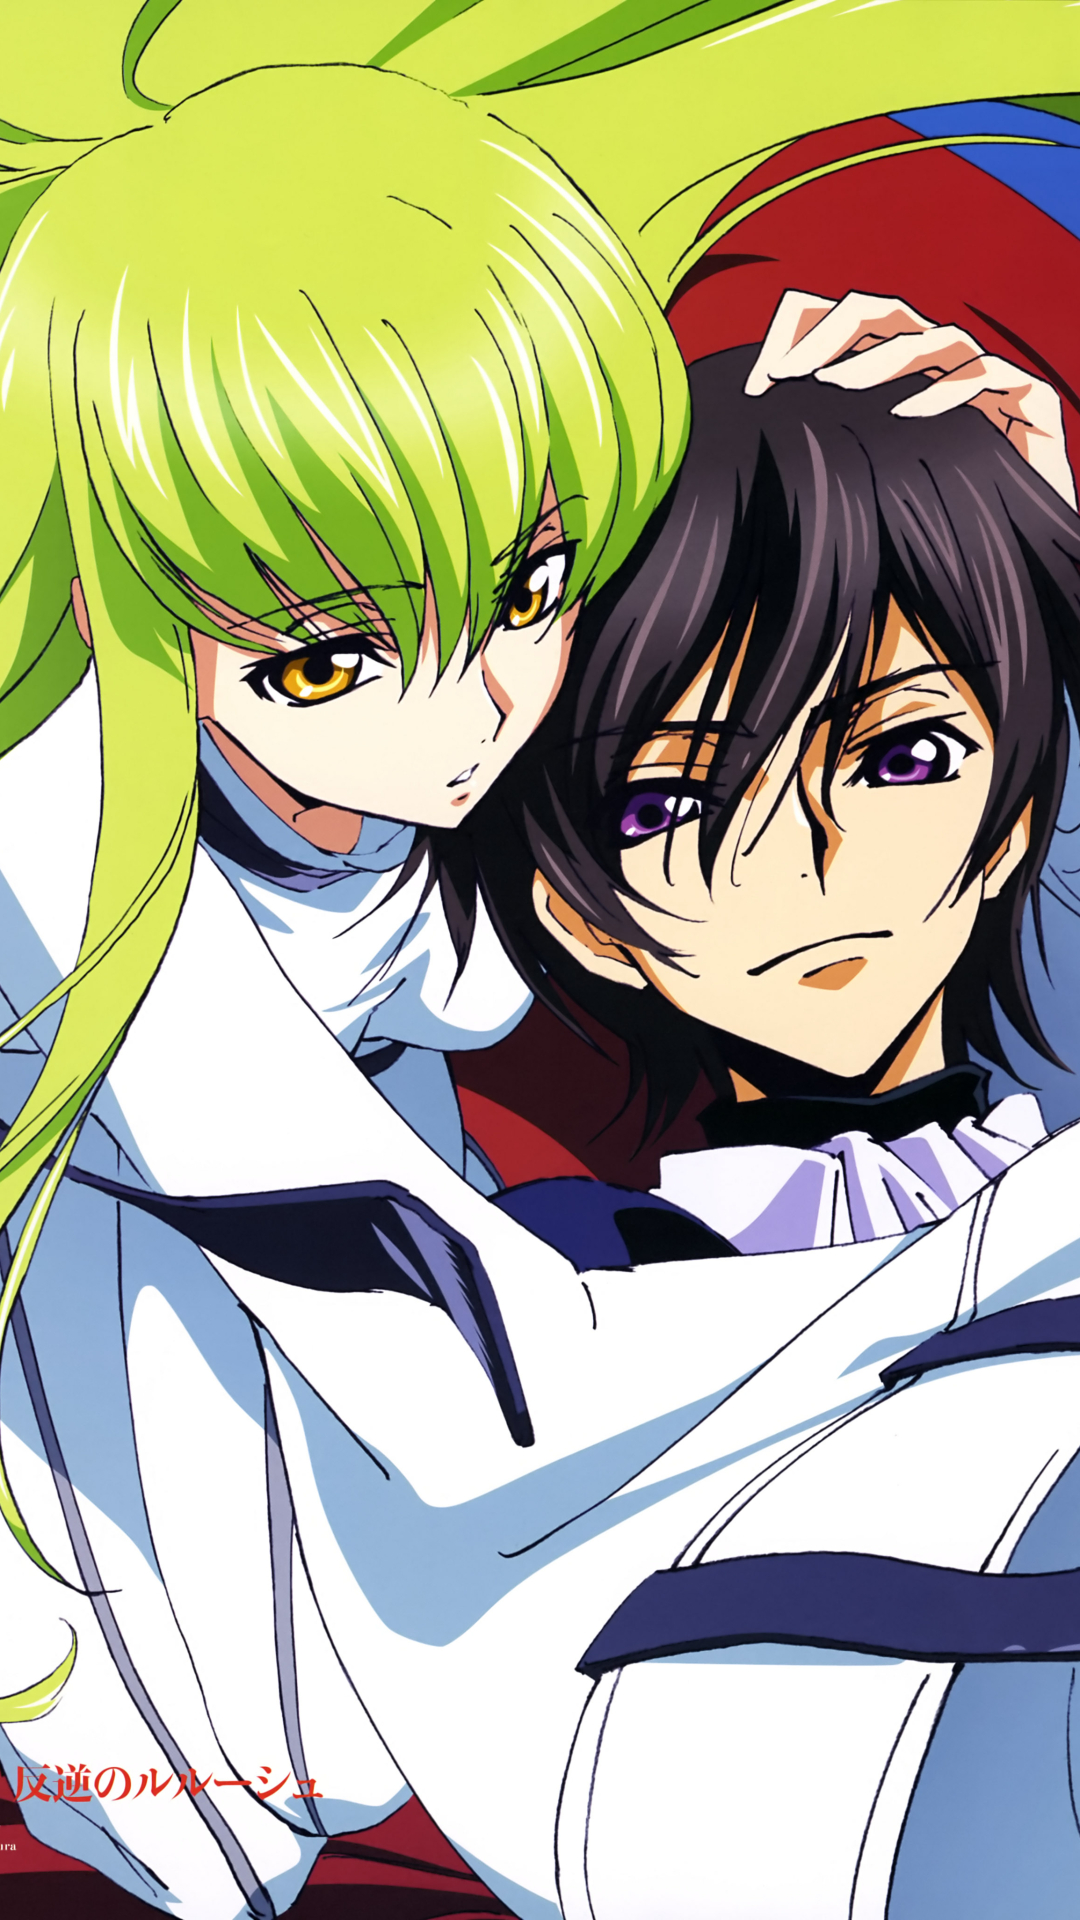 Lelouch and C.C. Wallpaper, Lelouch and C.C. from Code Geas…